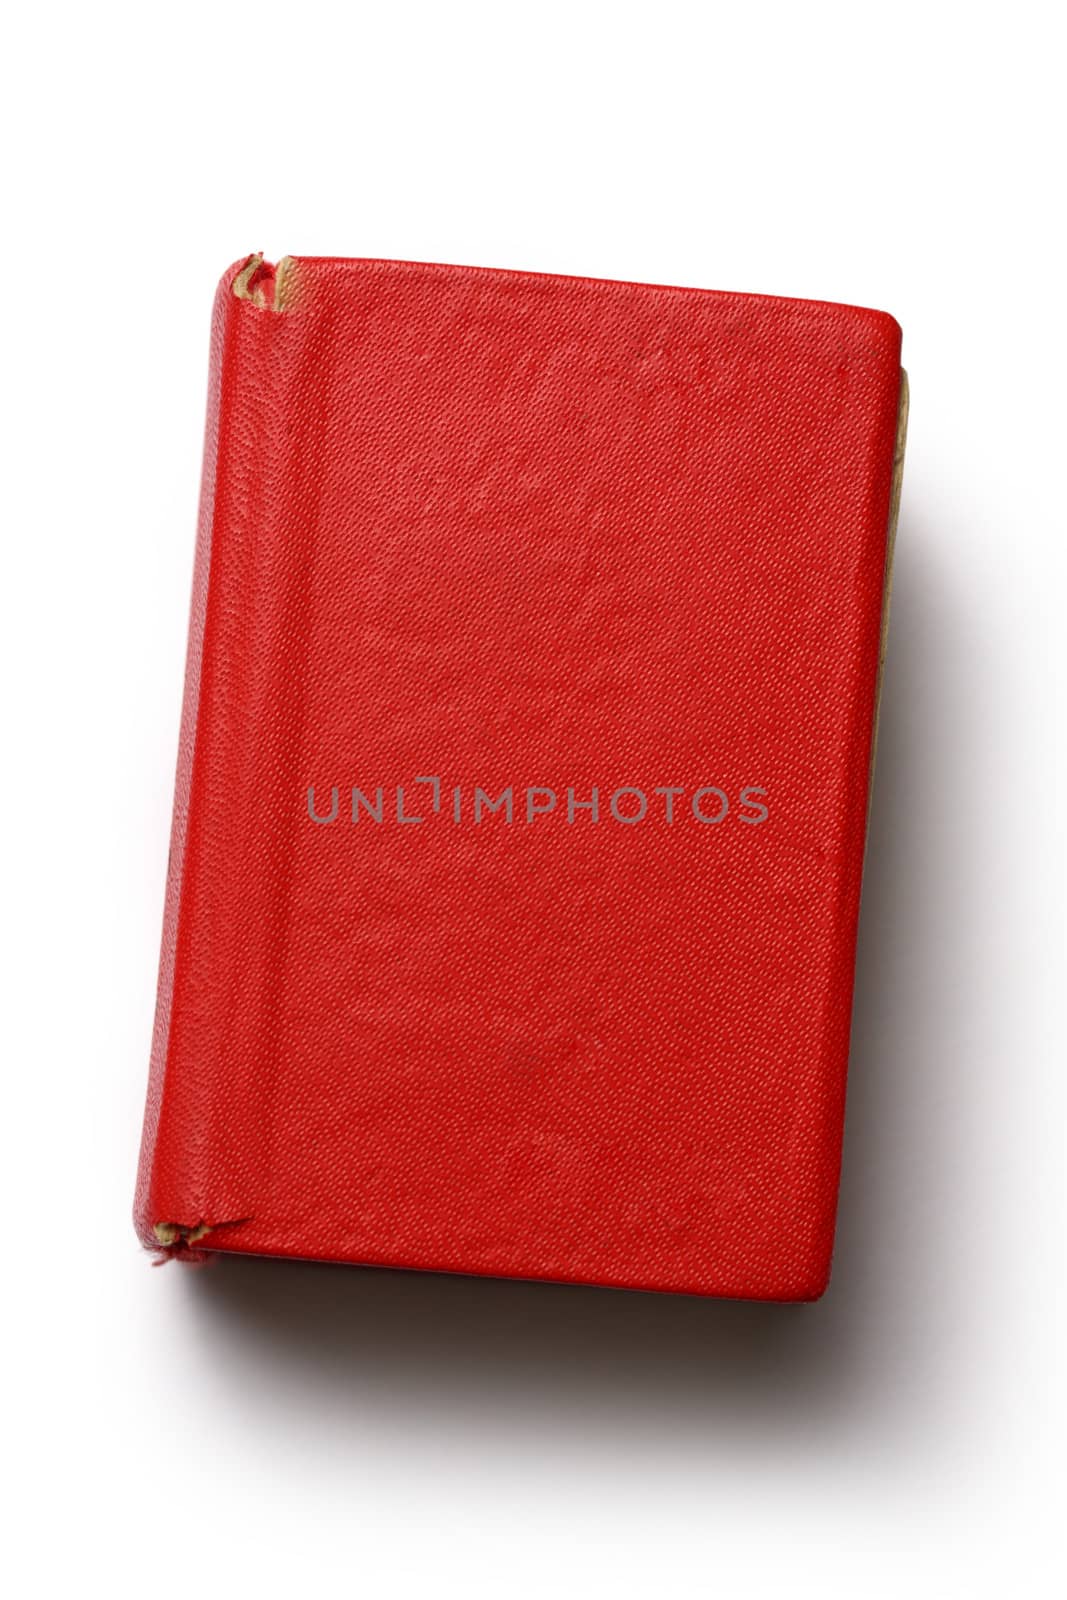 Old red book on white background